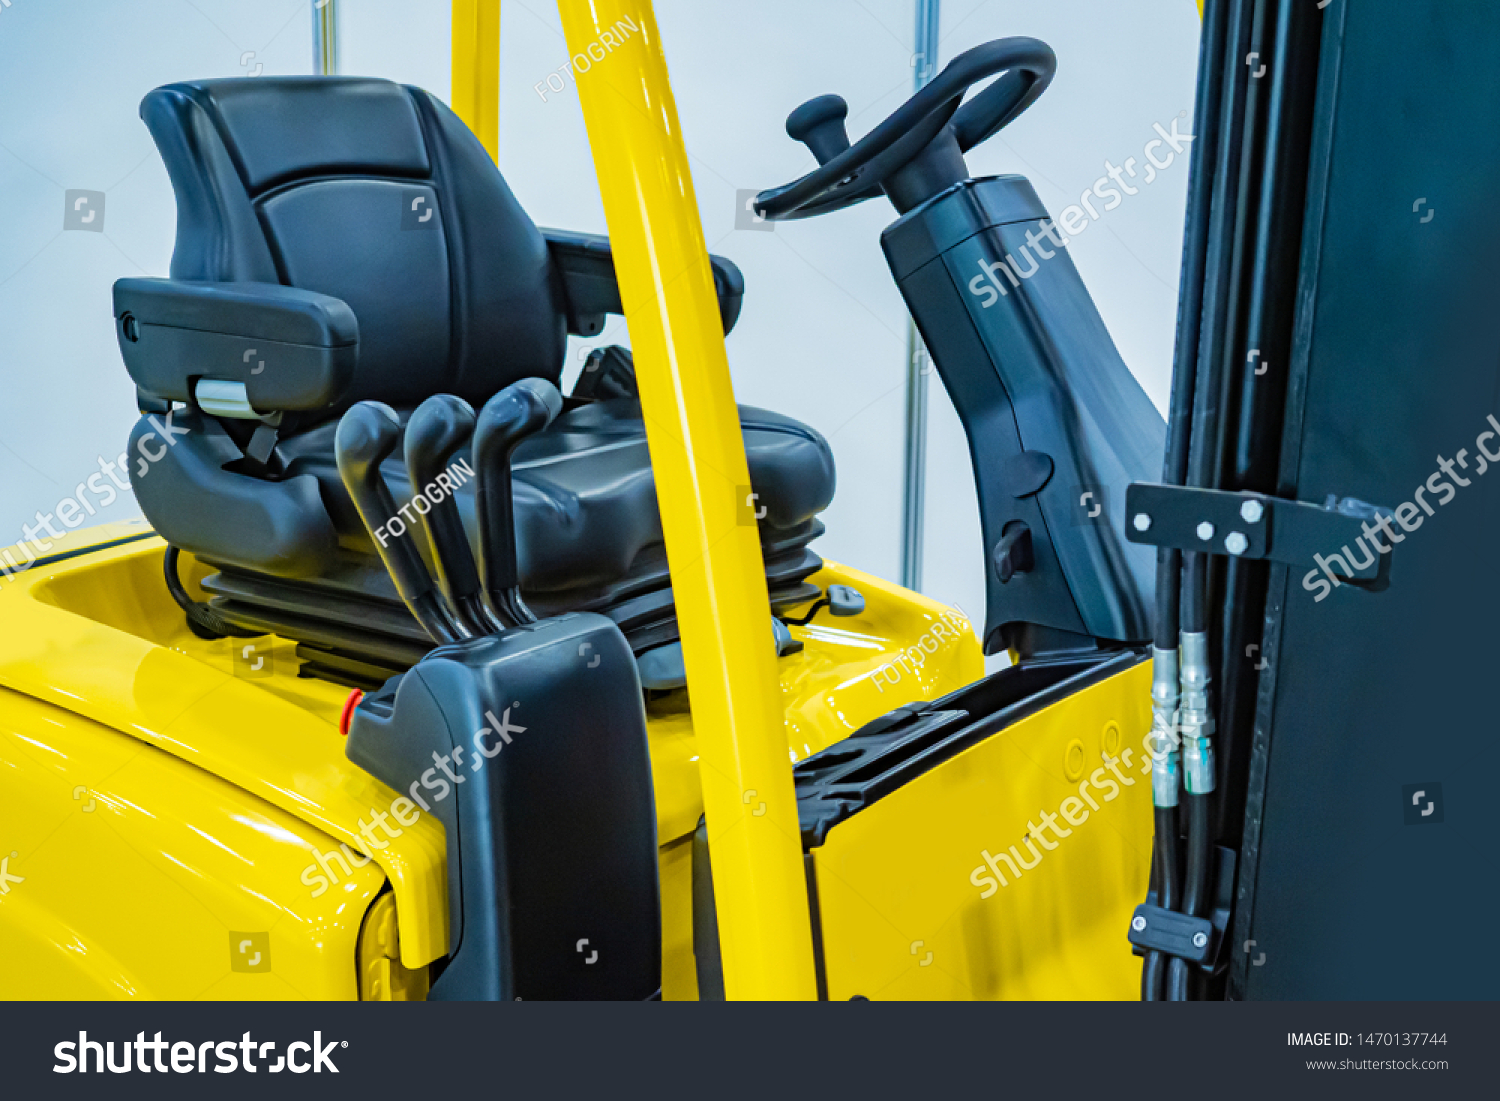 Drivers Seat Forklift Operator Forklift Stock Stock Photo Edit Now 1470137744